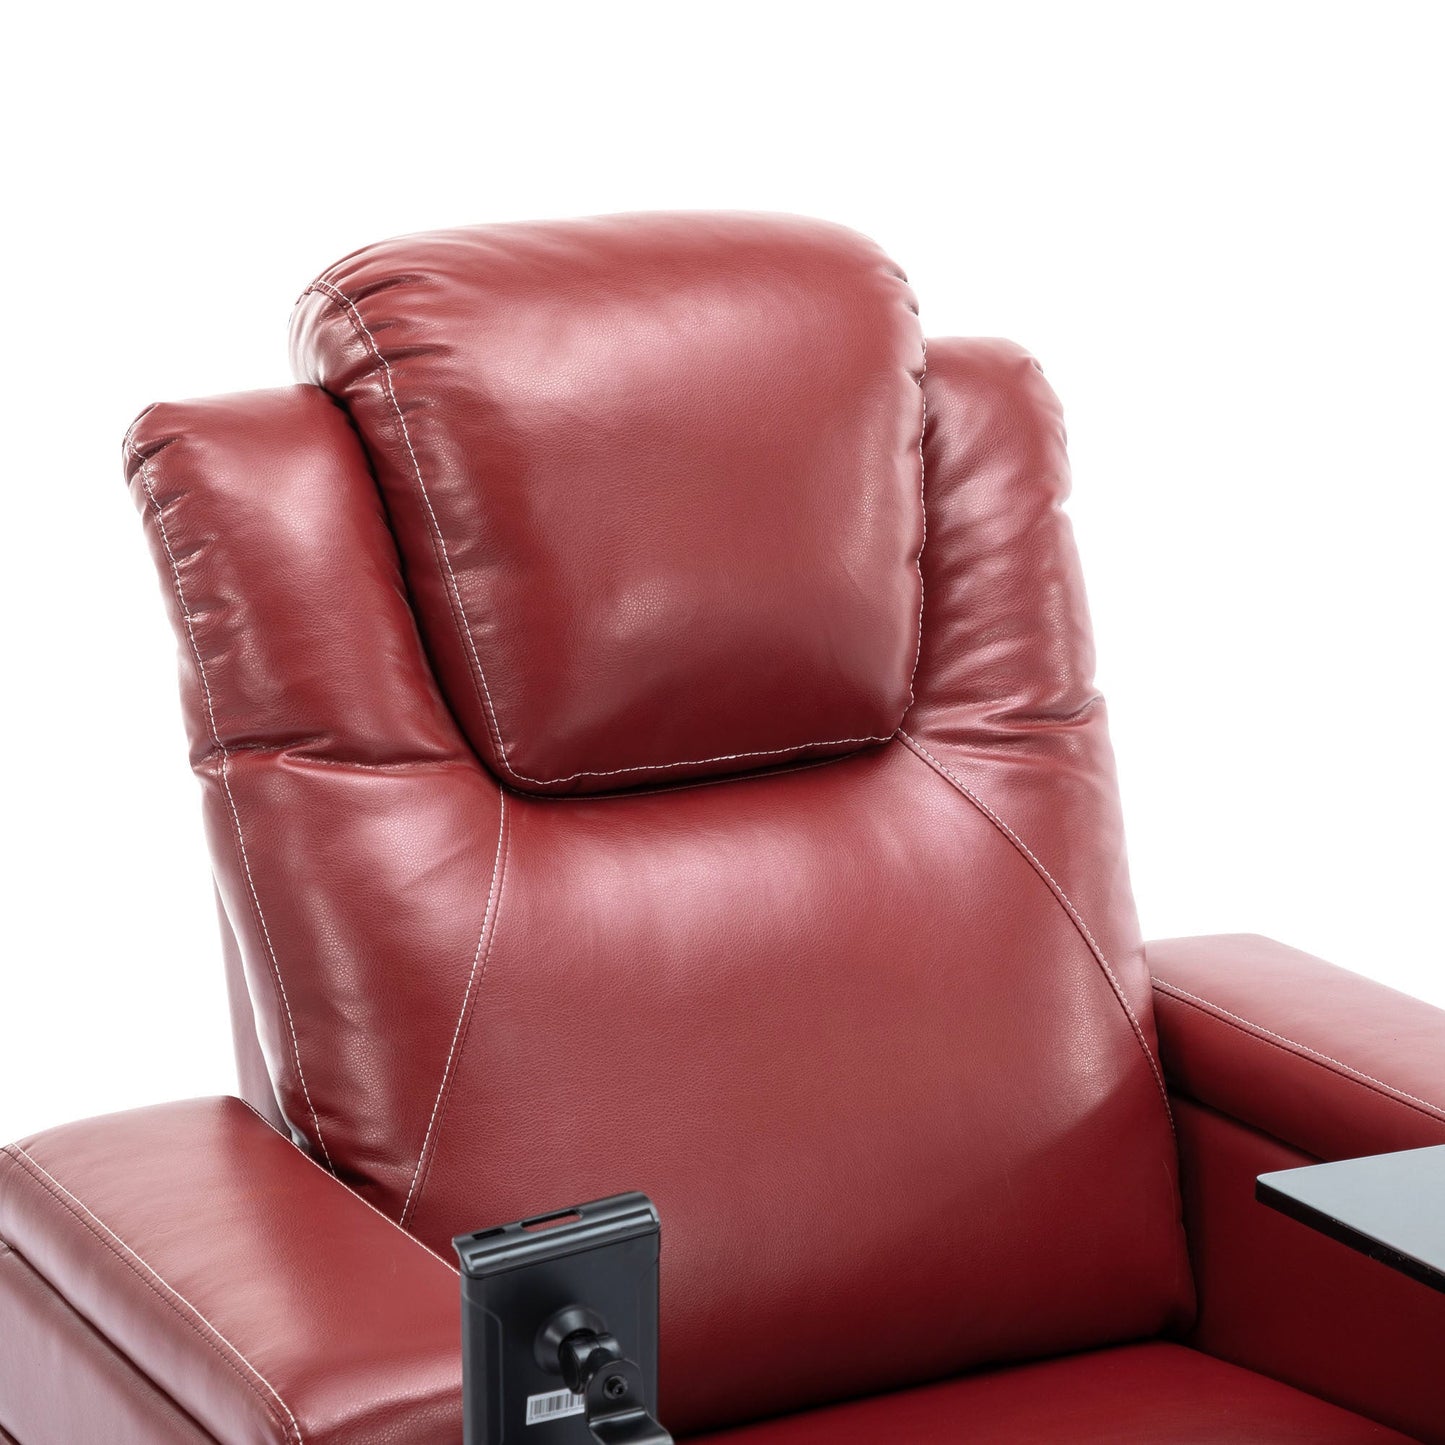 270 Degree Swivel PU Leather Power Recliner Individual Seat Home Theater Recliner with Surround Sound, Cup Holder, Removable Tray Table, Hidden Arm Storage for Living Room, Red